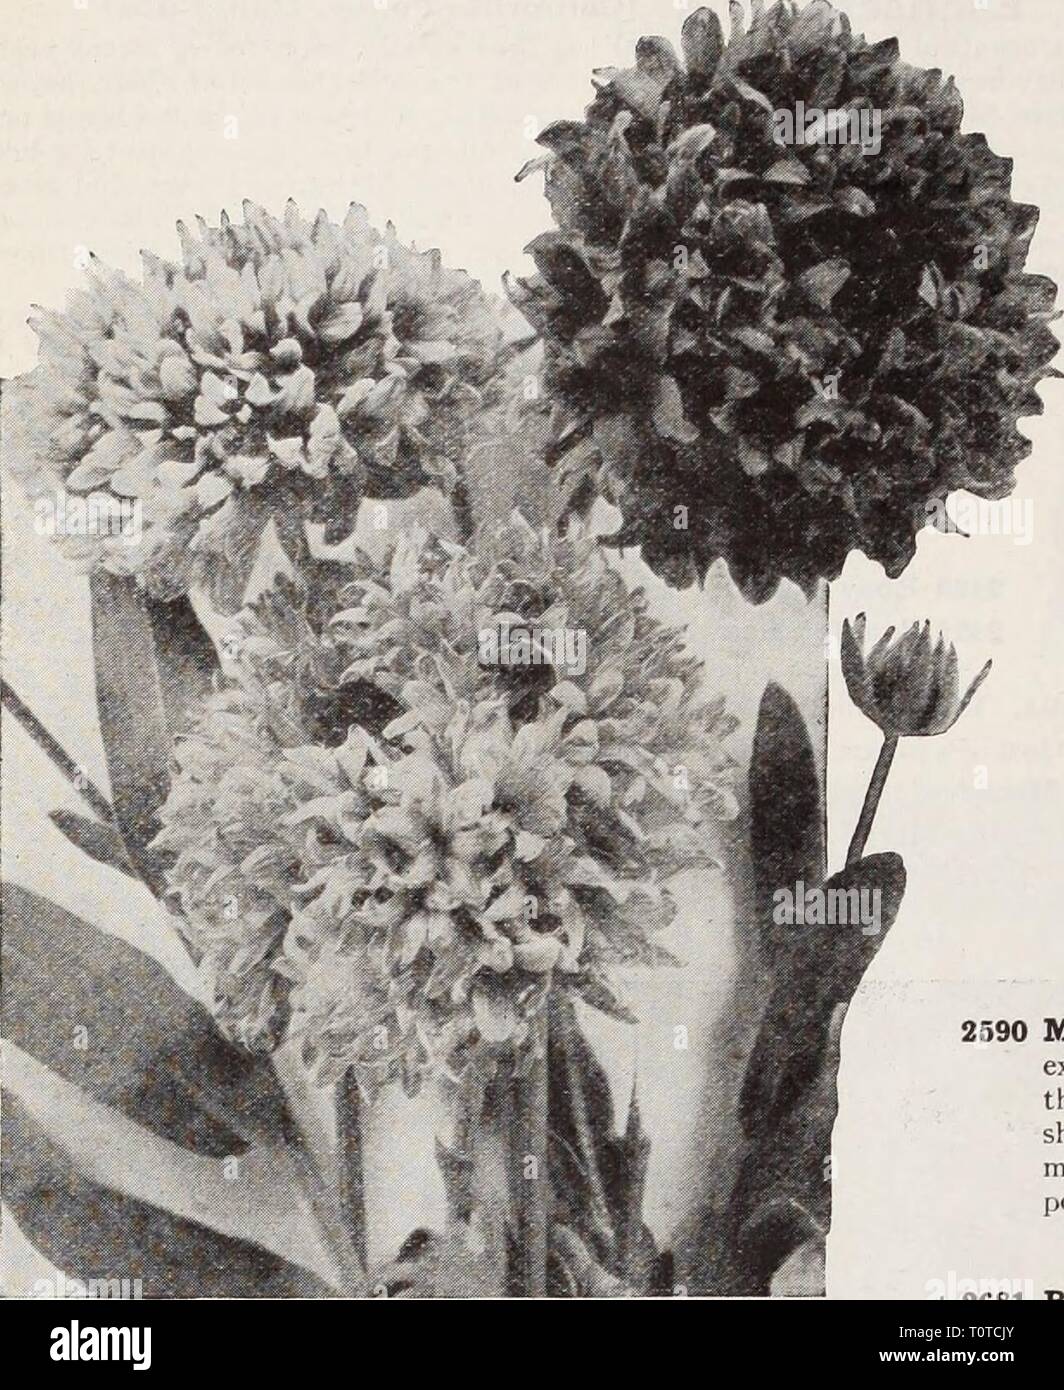 Dreer's garden book  Henry Dreer's garden book / Henry A. Dreer.  dreersgardenbook1931dree Year:   kRELIABLE FLOWER SEEDS/    Gilia (Queen Ann's Thimble) 2551 Capitata. This is a very graceful annual, pkr growing about 2 feet high with fine feathery PKT' foliage and bearing freely over a long season, globular heads, about 1 inch across, of rich lavender blue flowers, which last well when cut. Illustrated in colors on plate opposite page 49. i oz., 25 cts $0 10 Globe Amaranth (Gomphrena) 2570 Mixed. Popularly known as 'Bachelor's Button,' a first-rate bedding plant; the flow- ers resemble clove Stock Photo